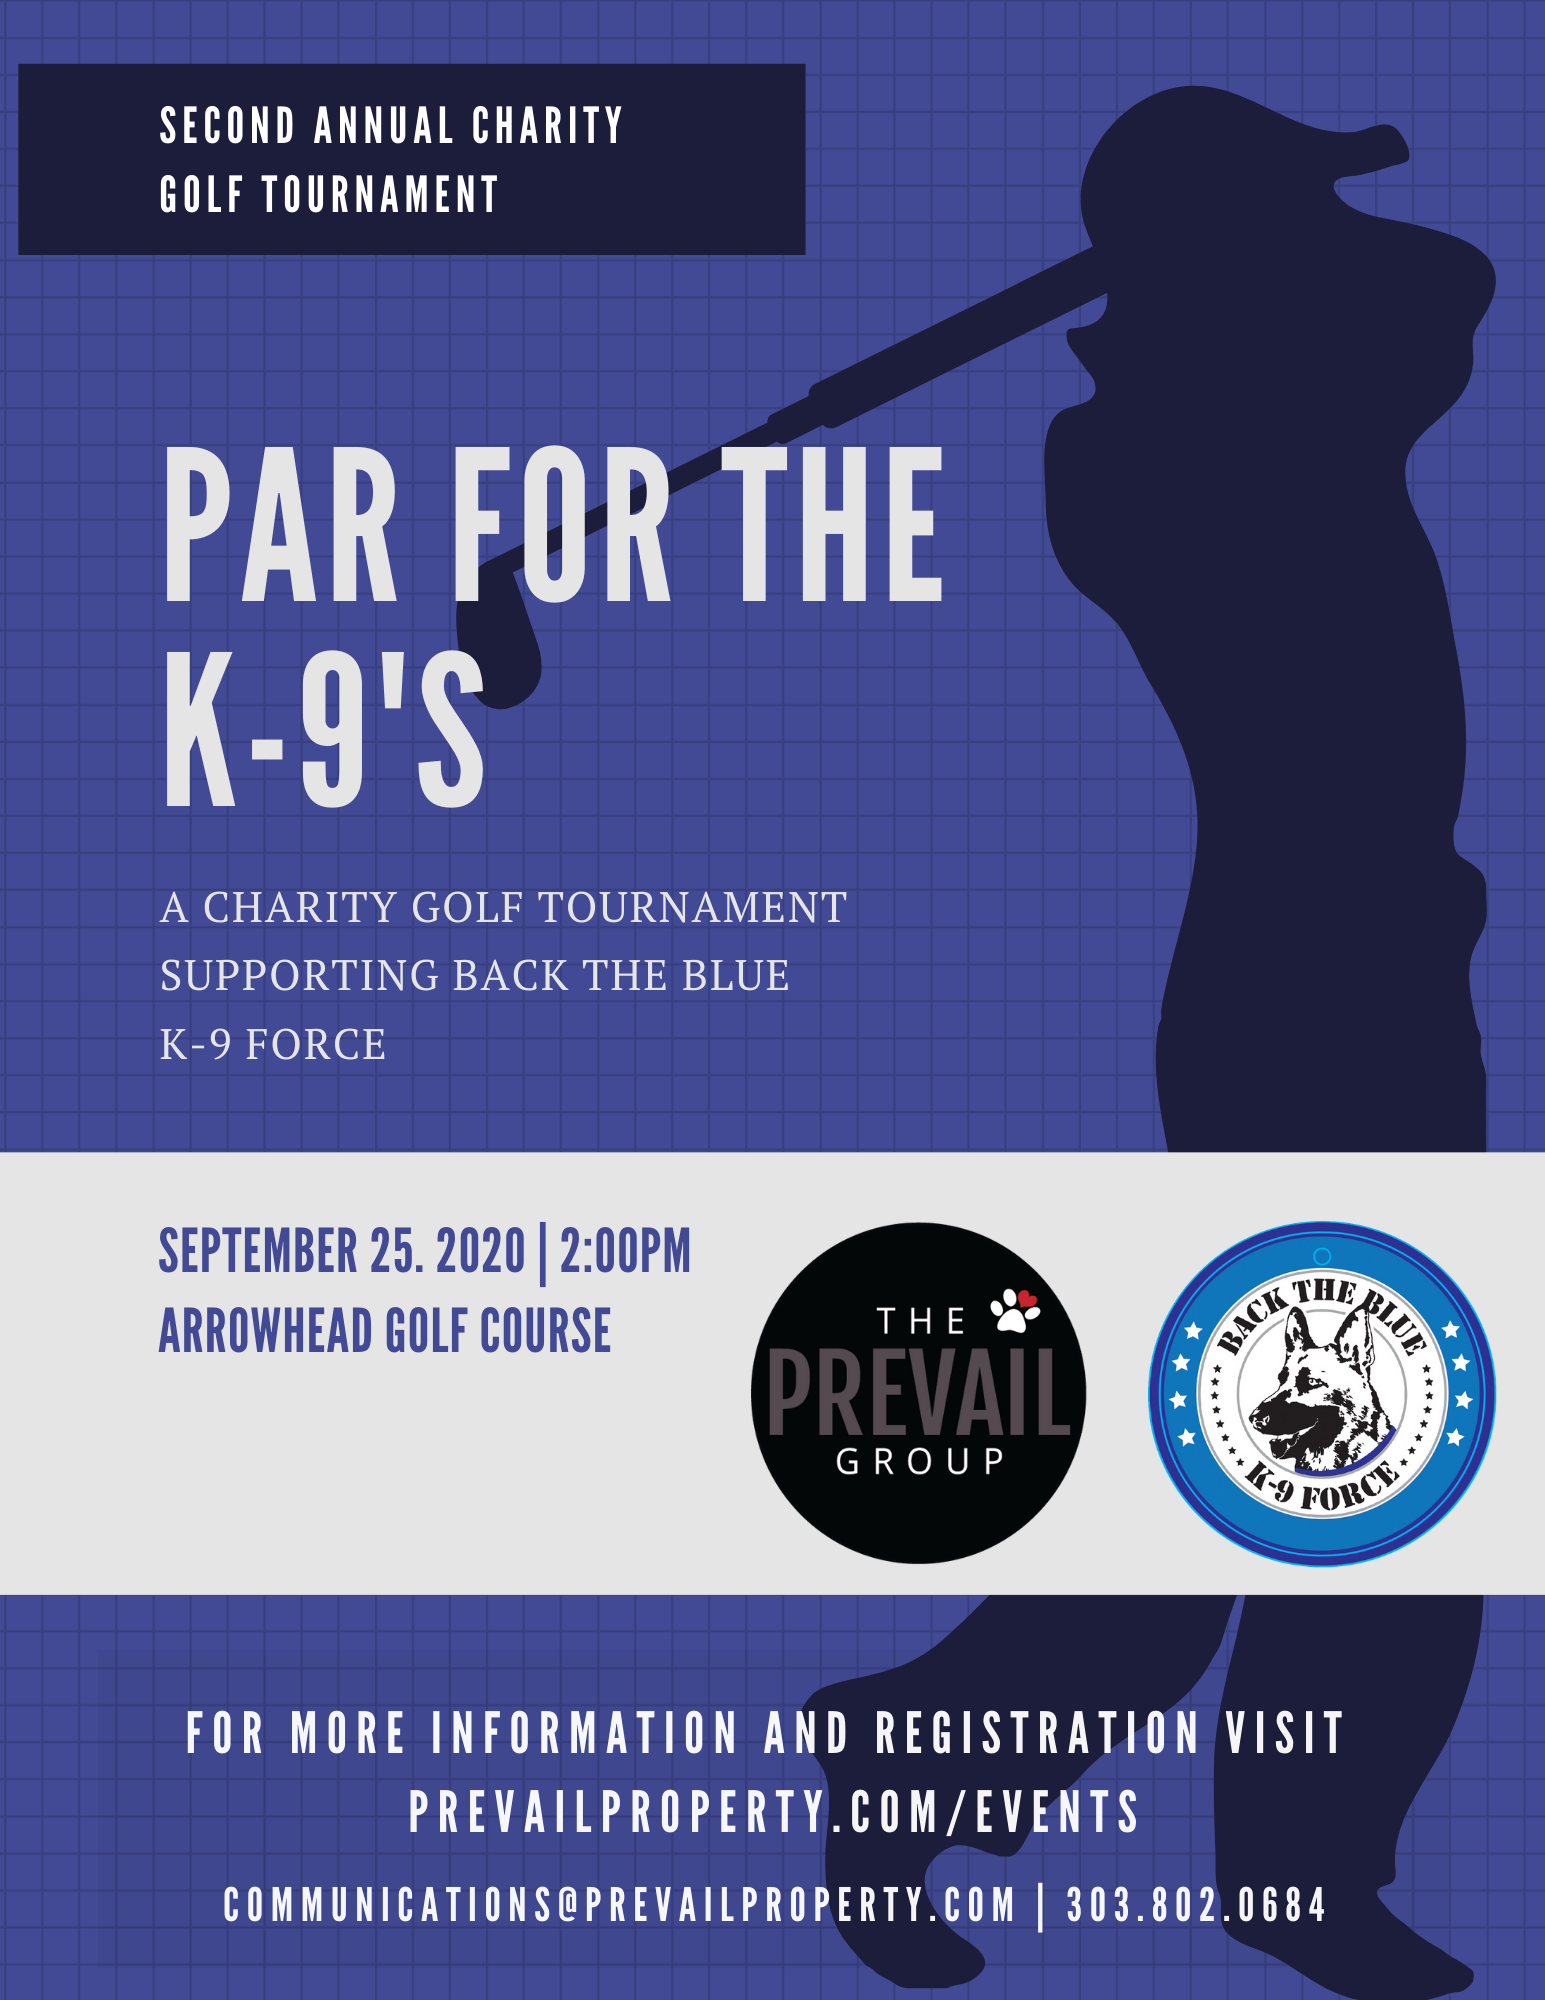 Second Annual Par For The K-9's Charity Golf Tournament